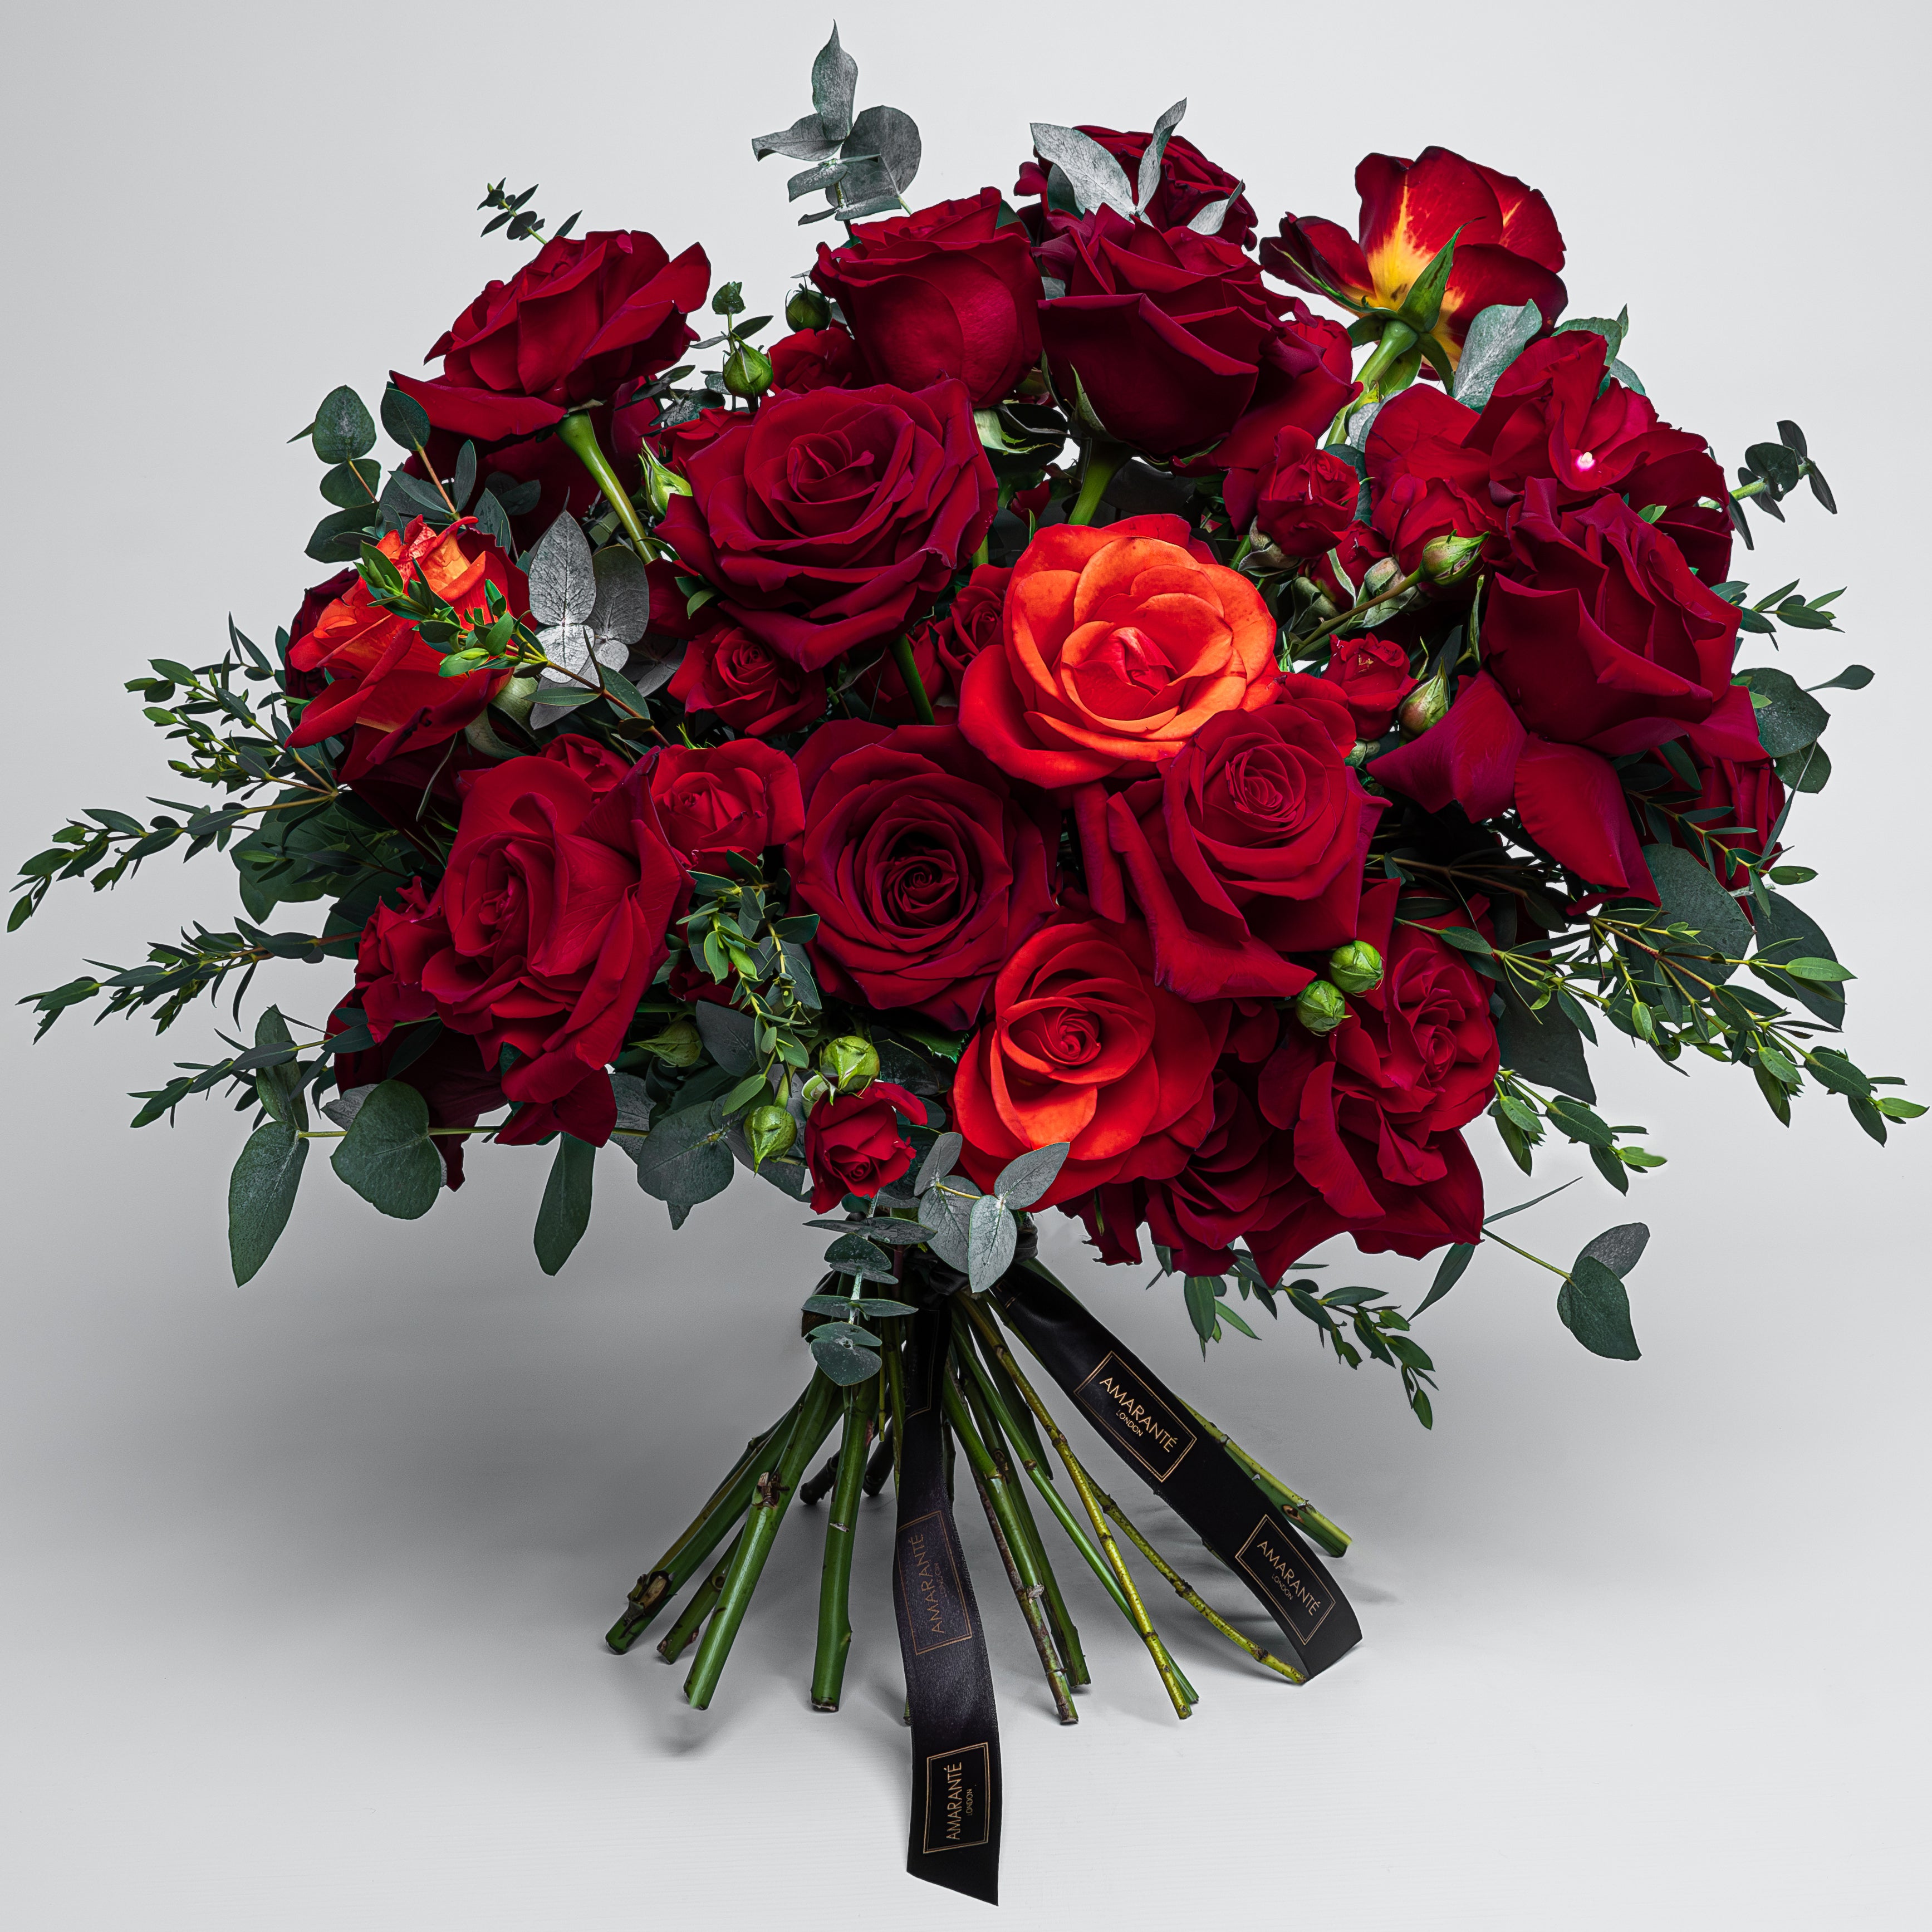 Scarlett Desire is a captivating fresh flower bouquet showcasing exquisite arrangements of elegant red roses in vibrant shades, perfectly symbolising love and affection. This sophisticated and refined bouquet exudes timeless elegance and grace, perfectly designed for a stylish and classy Vday gesture. This polished and luxurious bouquet of roses, available with free UK delivery, is the ideal sophisticated representation of your chic affection.